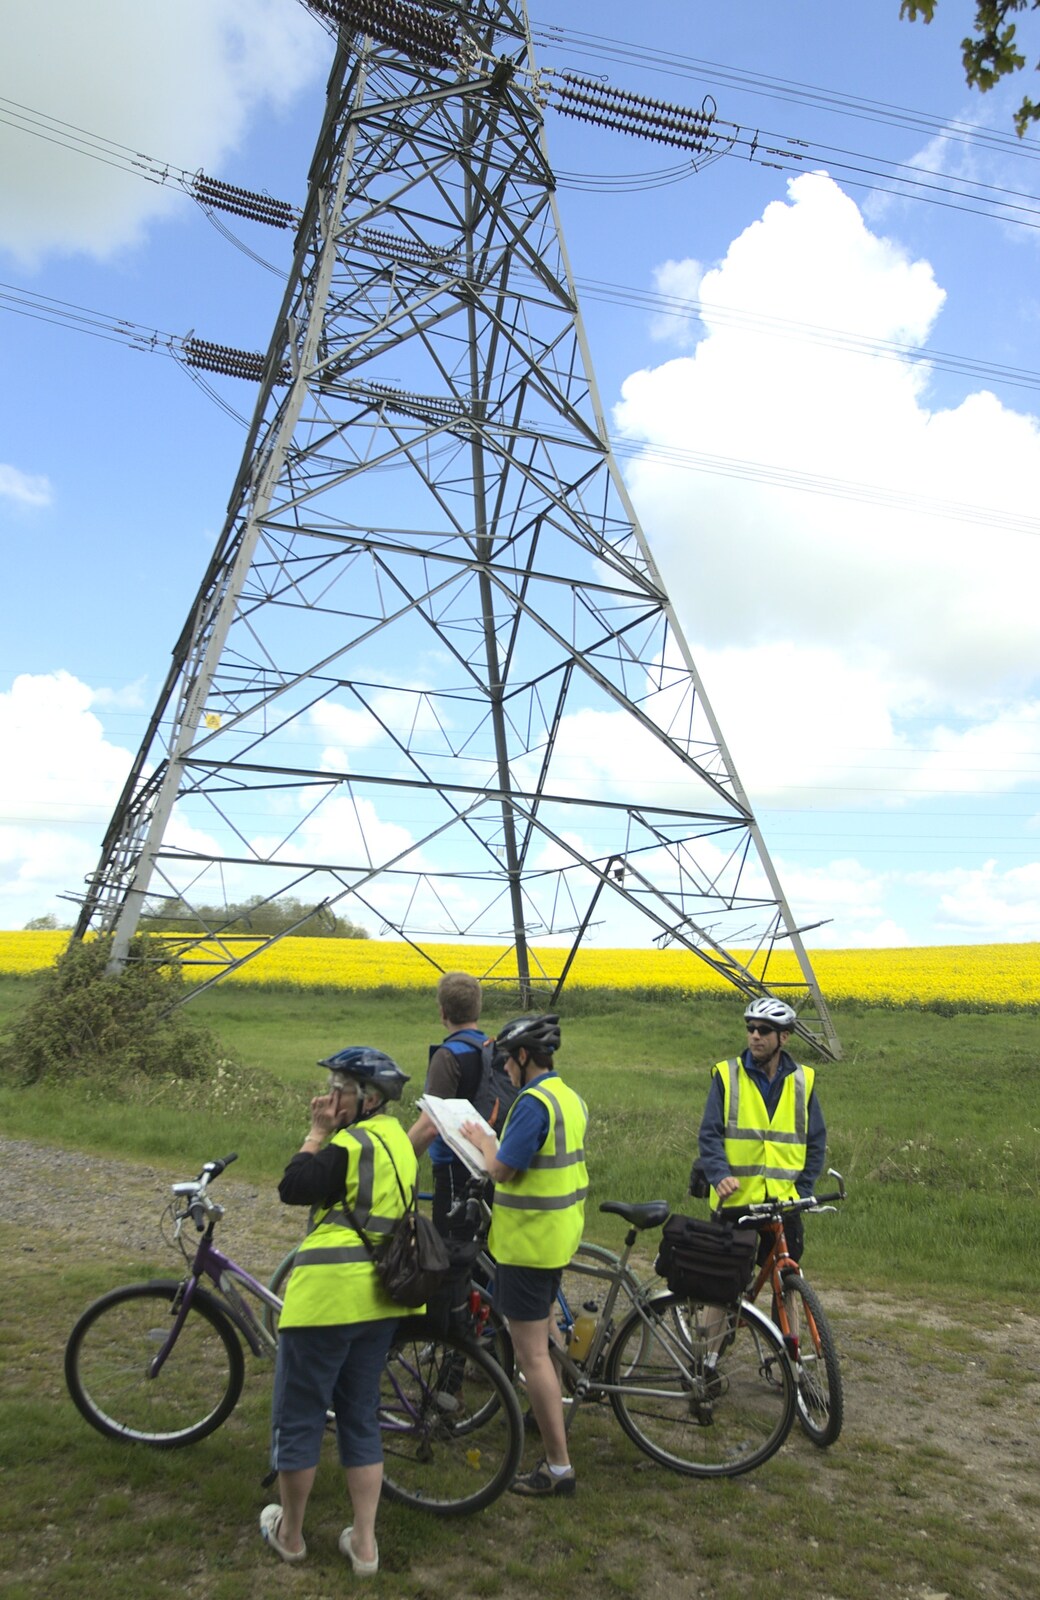 The BSCC Weekend Away, Buckden, St. Neots, Huntingdonshire - 15th May 2010: Another map check, under a high-voltage pylon